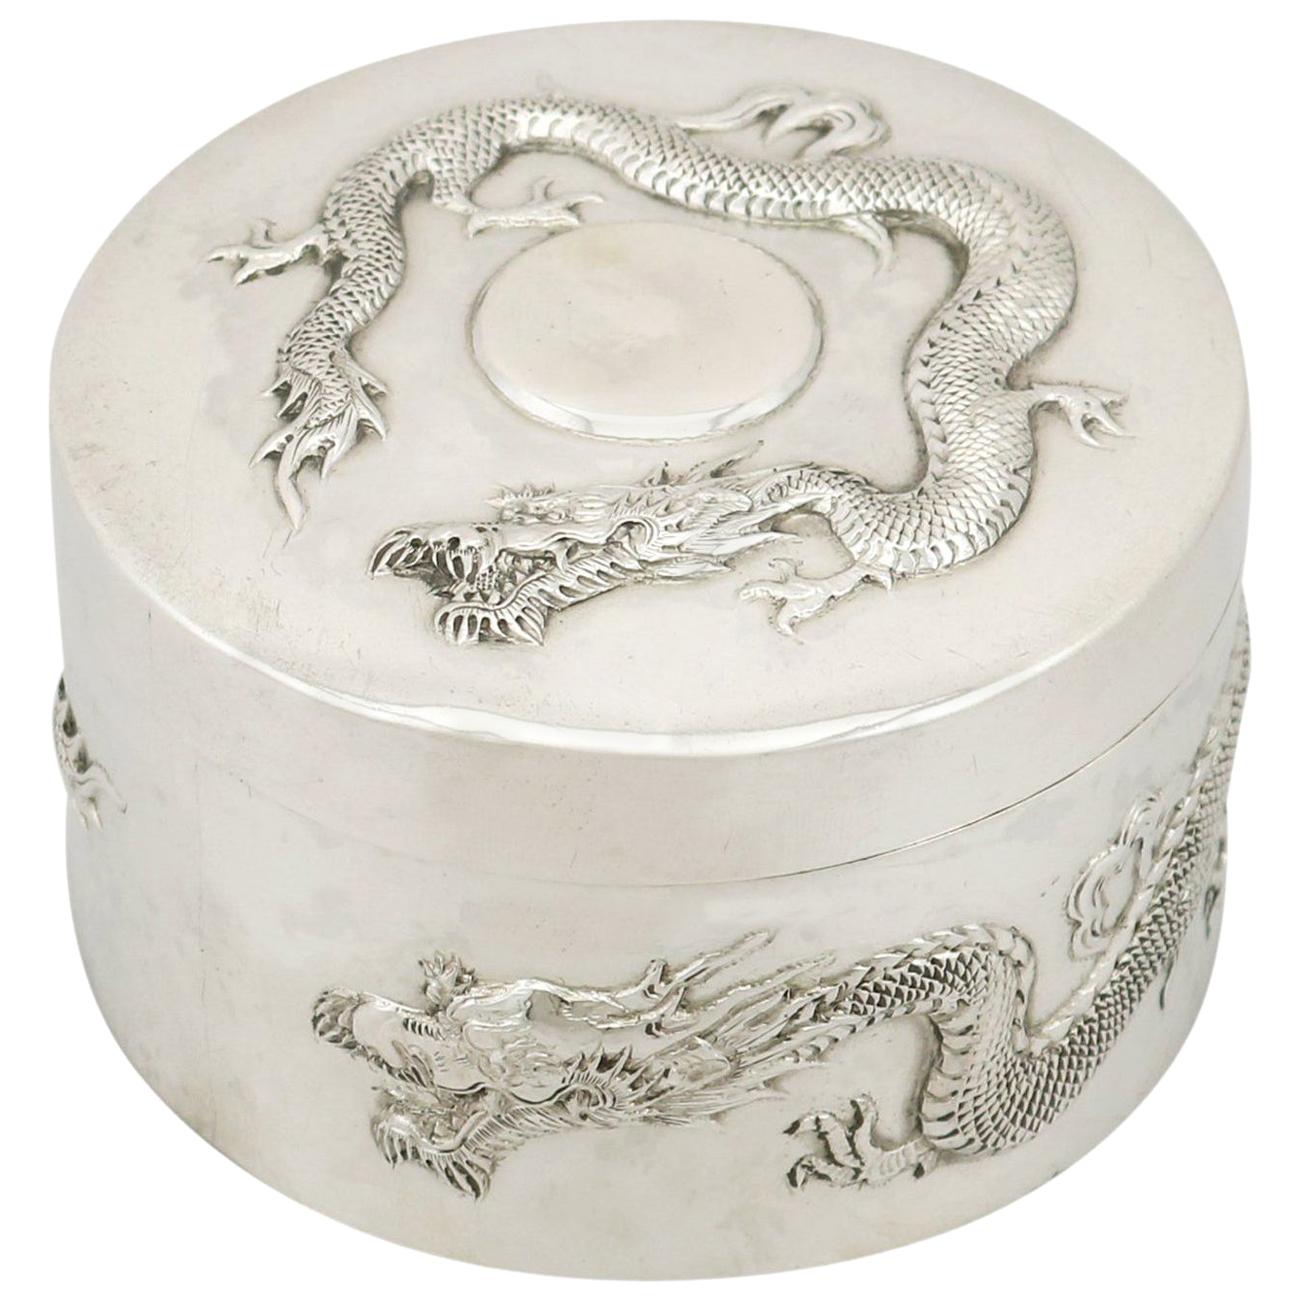 1890s Antique Chinese Export Silver Box by Wang Hing